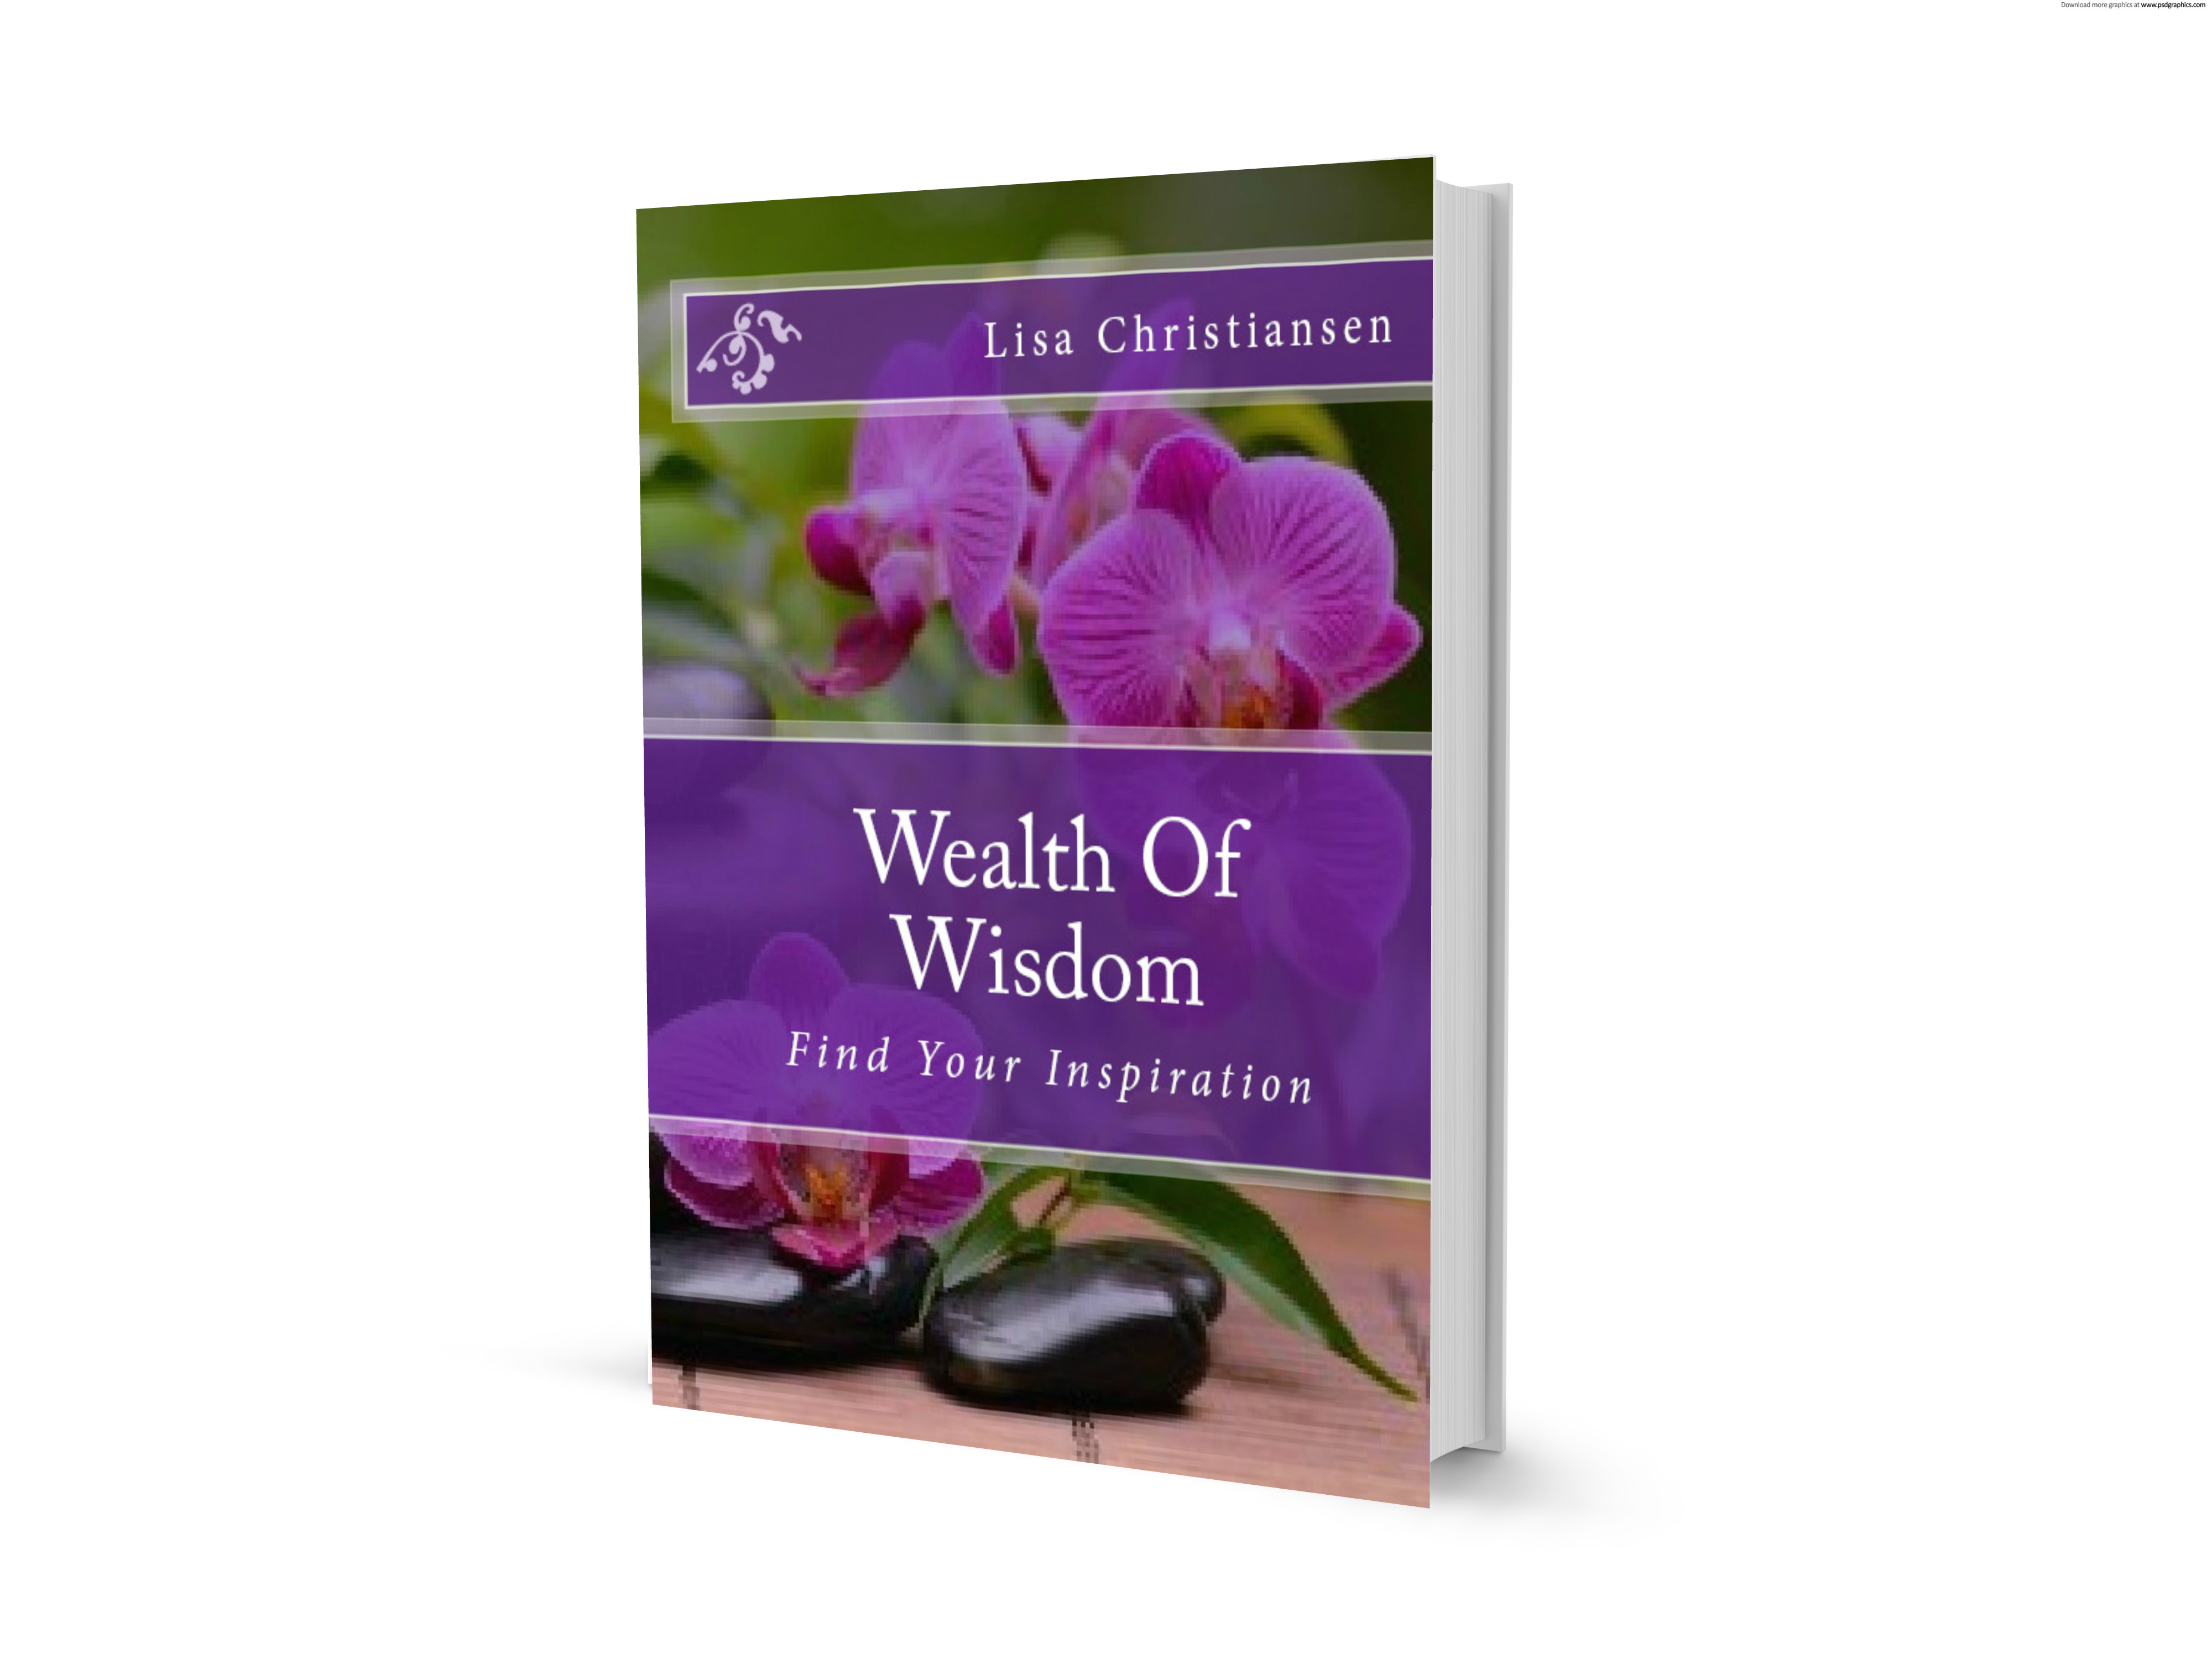 WEALTH OF WISDOM provides stories of Courage, Inspiration and motivation that will unlock your preconscious level to communicate with your subconscious to lead your conscious self. Some will touch you, others move you. There are insights that will enlight